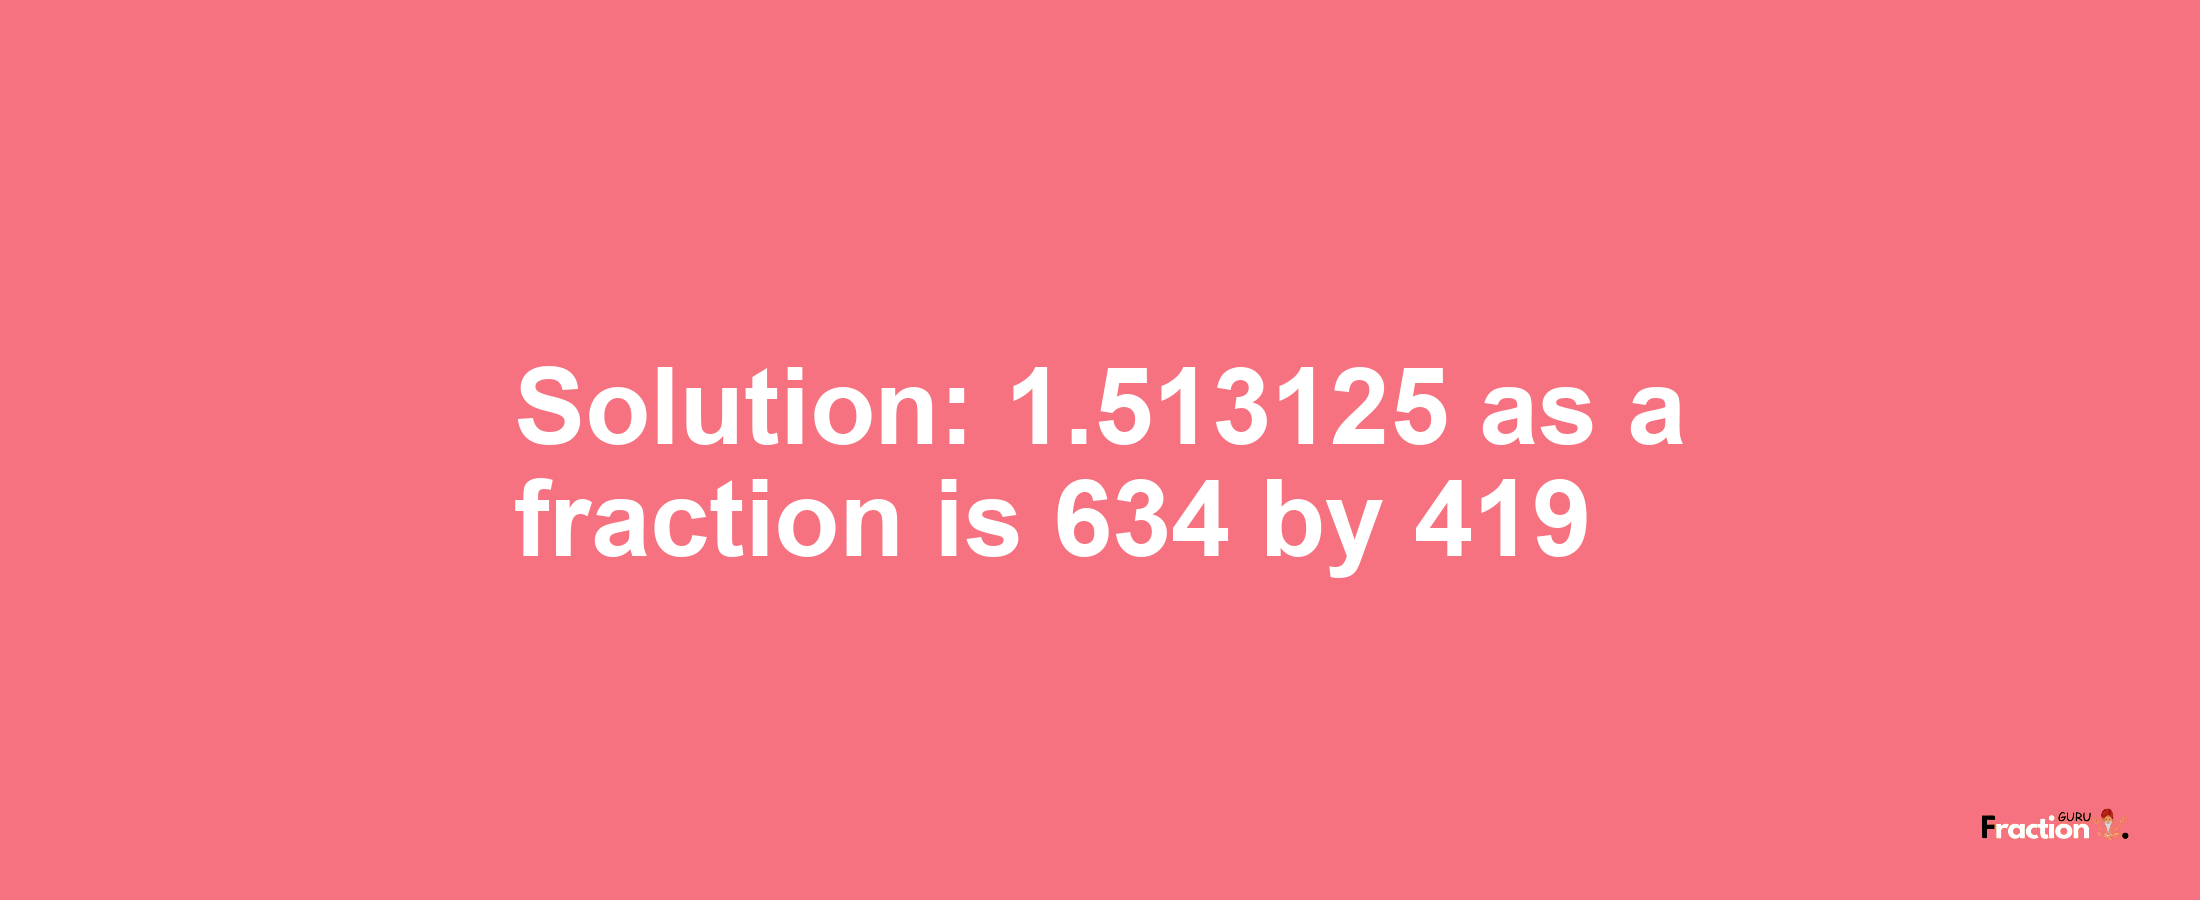 Solution:1.513125 as a fraction is 634/419